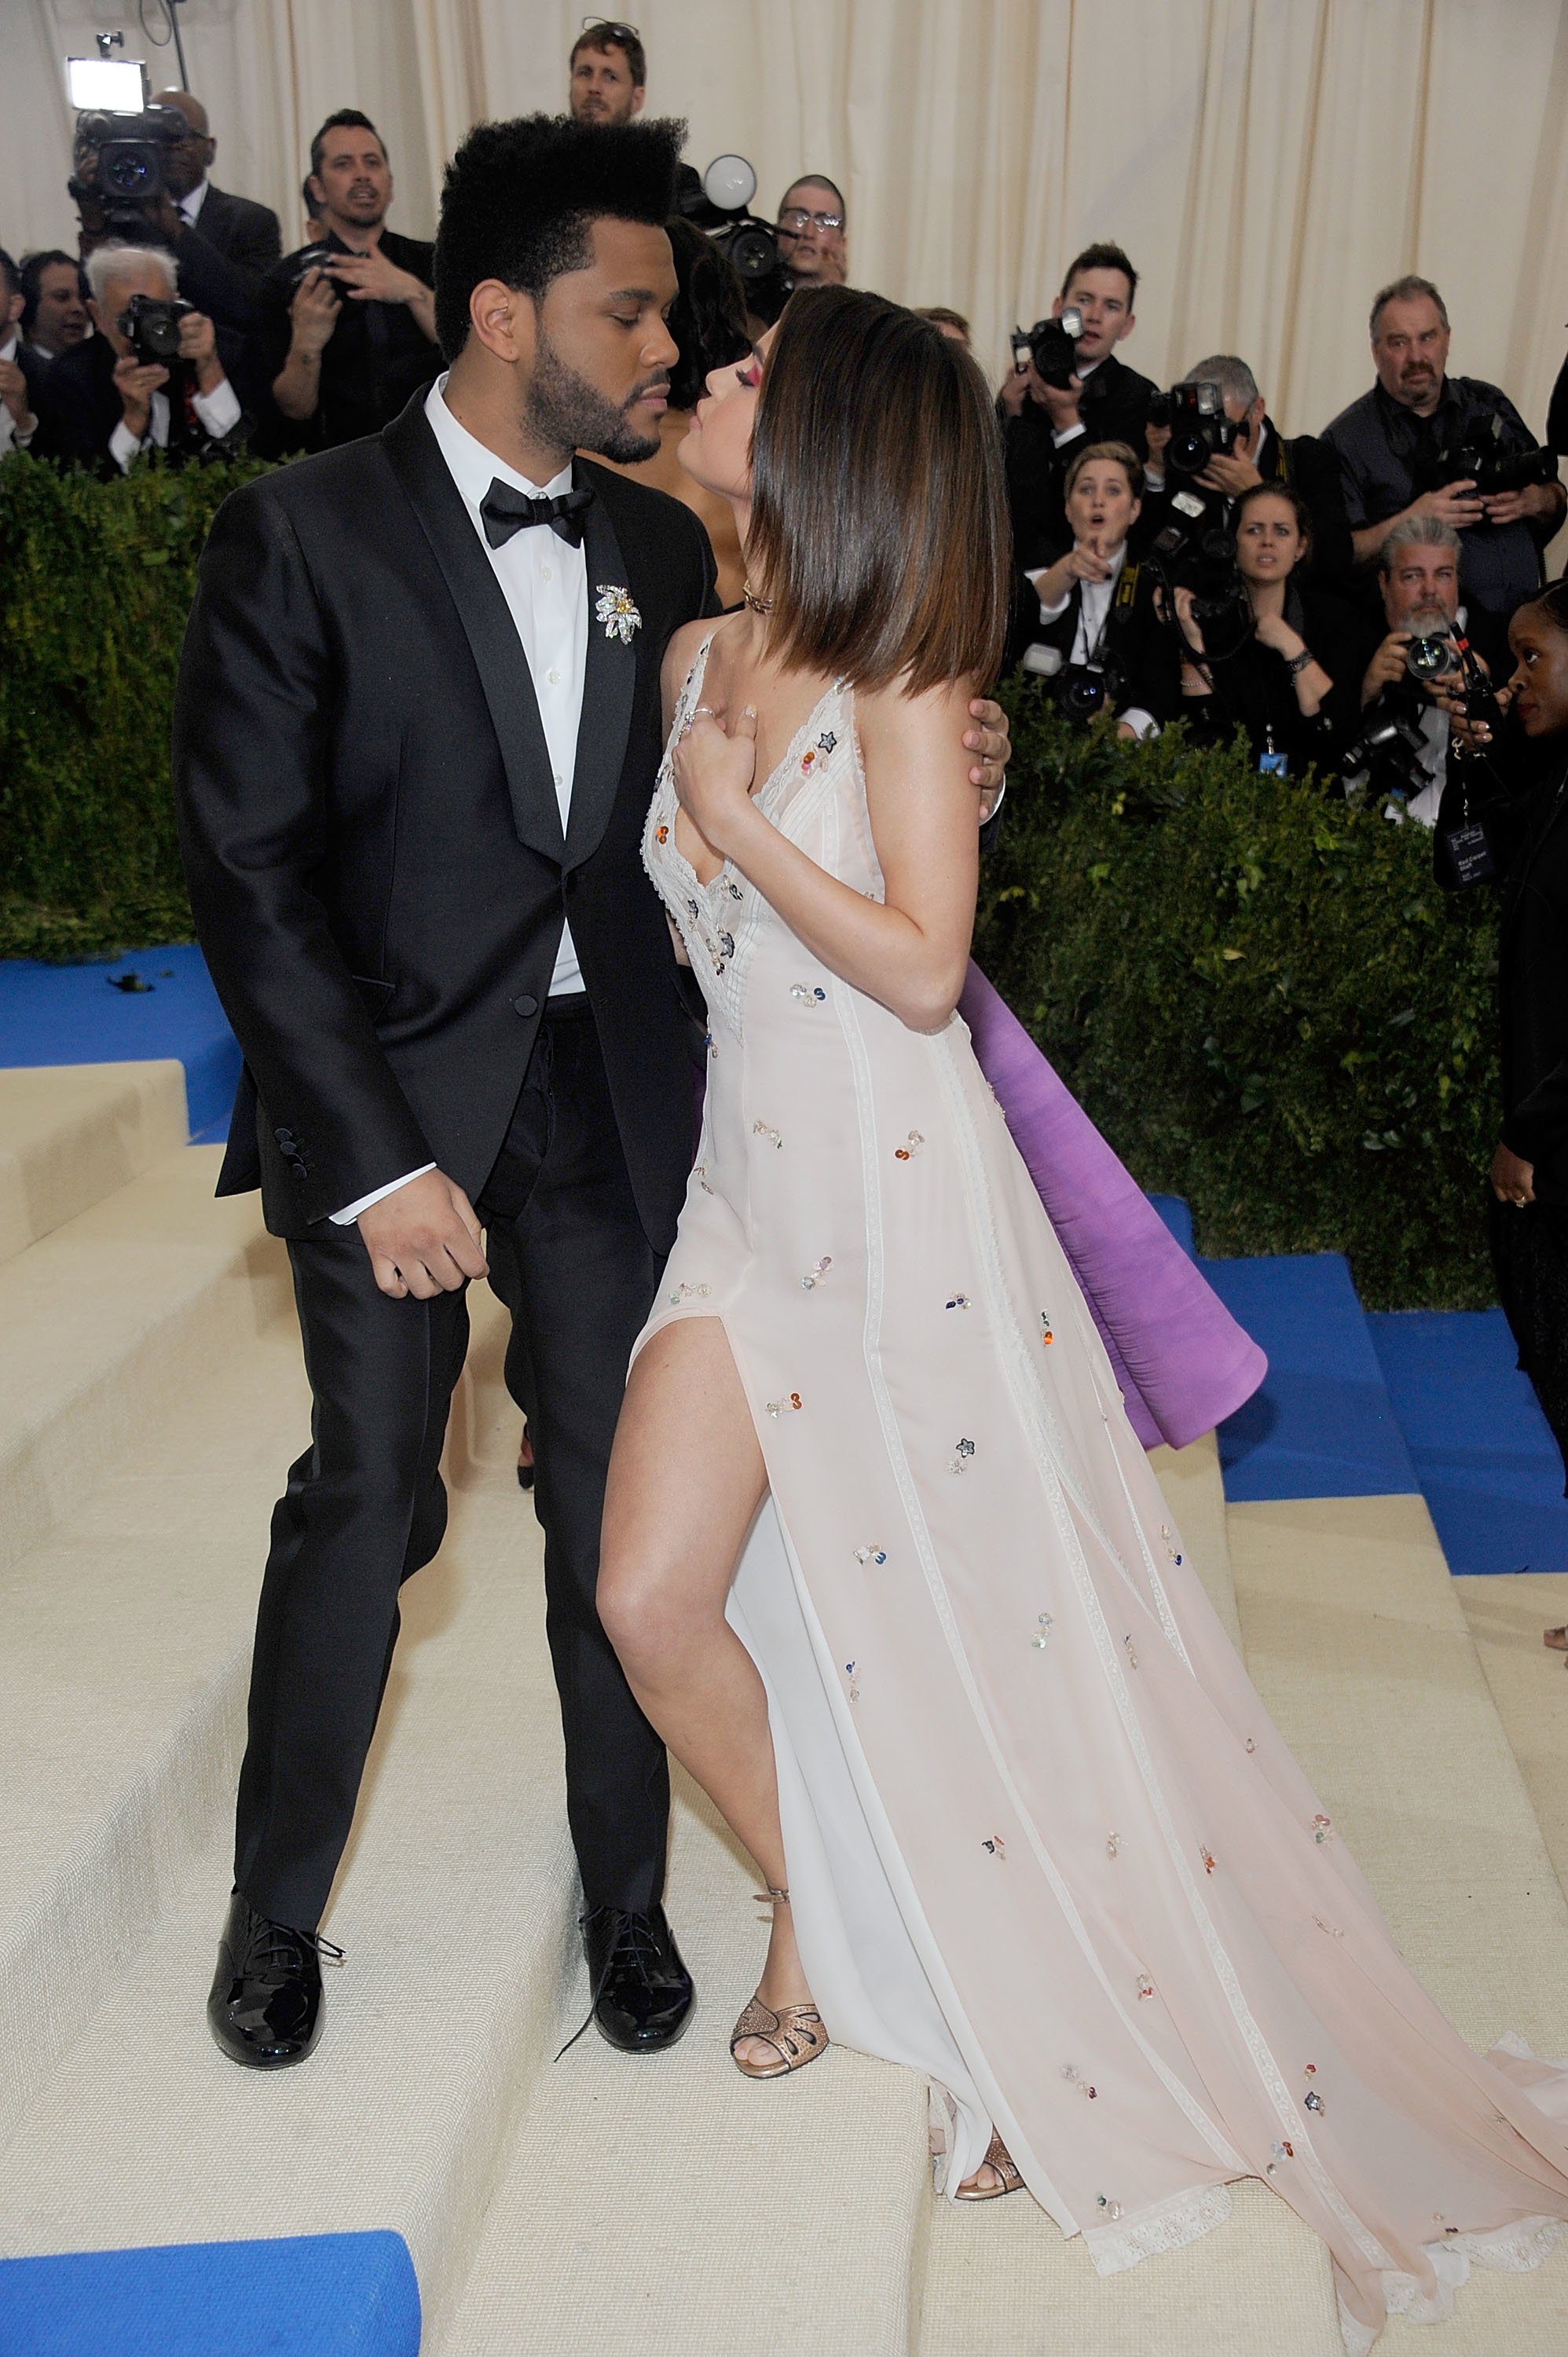 Selena and The Weeknd at the Met Gala